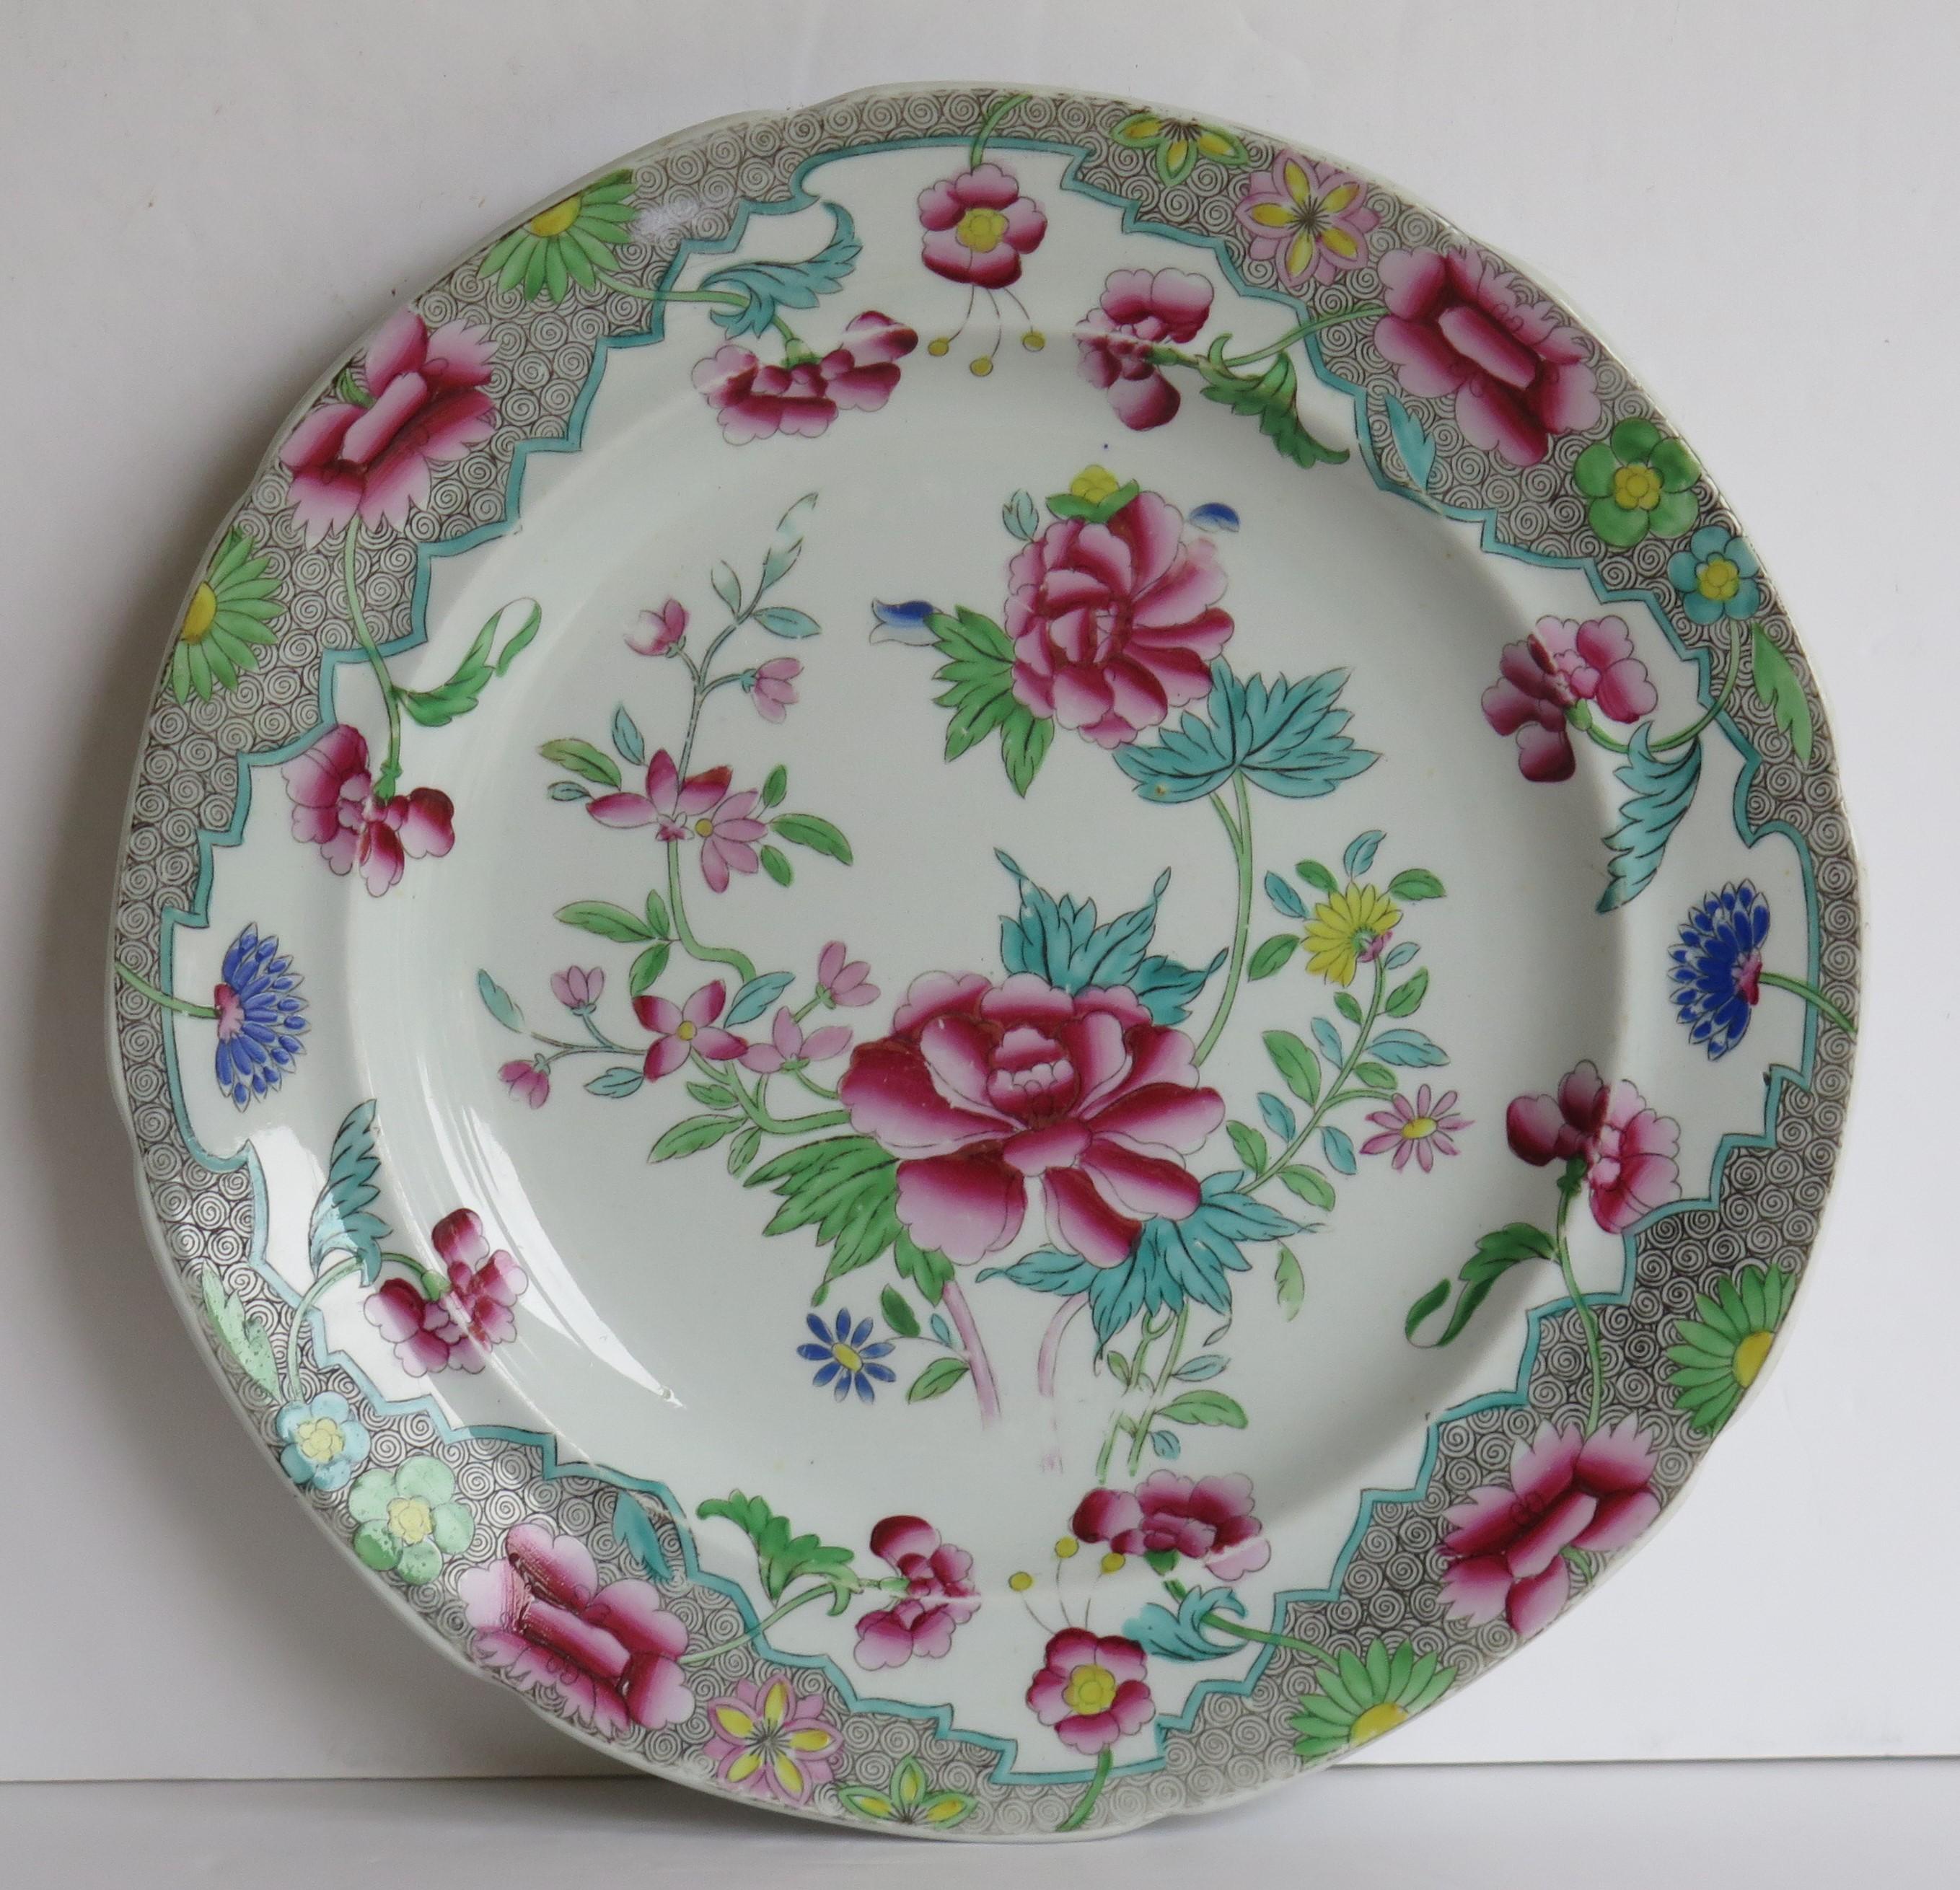 George III Georgian Hicks and Meigh Ironstone Plate in Floral Pattern No.8, Circa 1815 For Sale